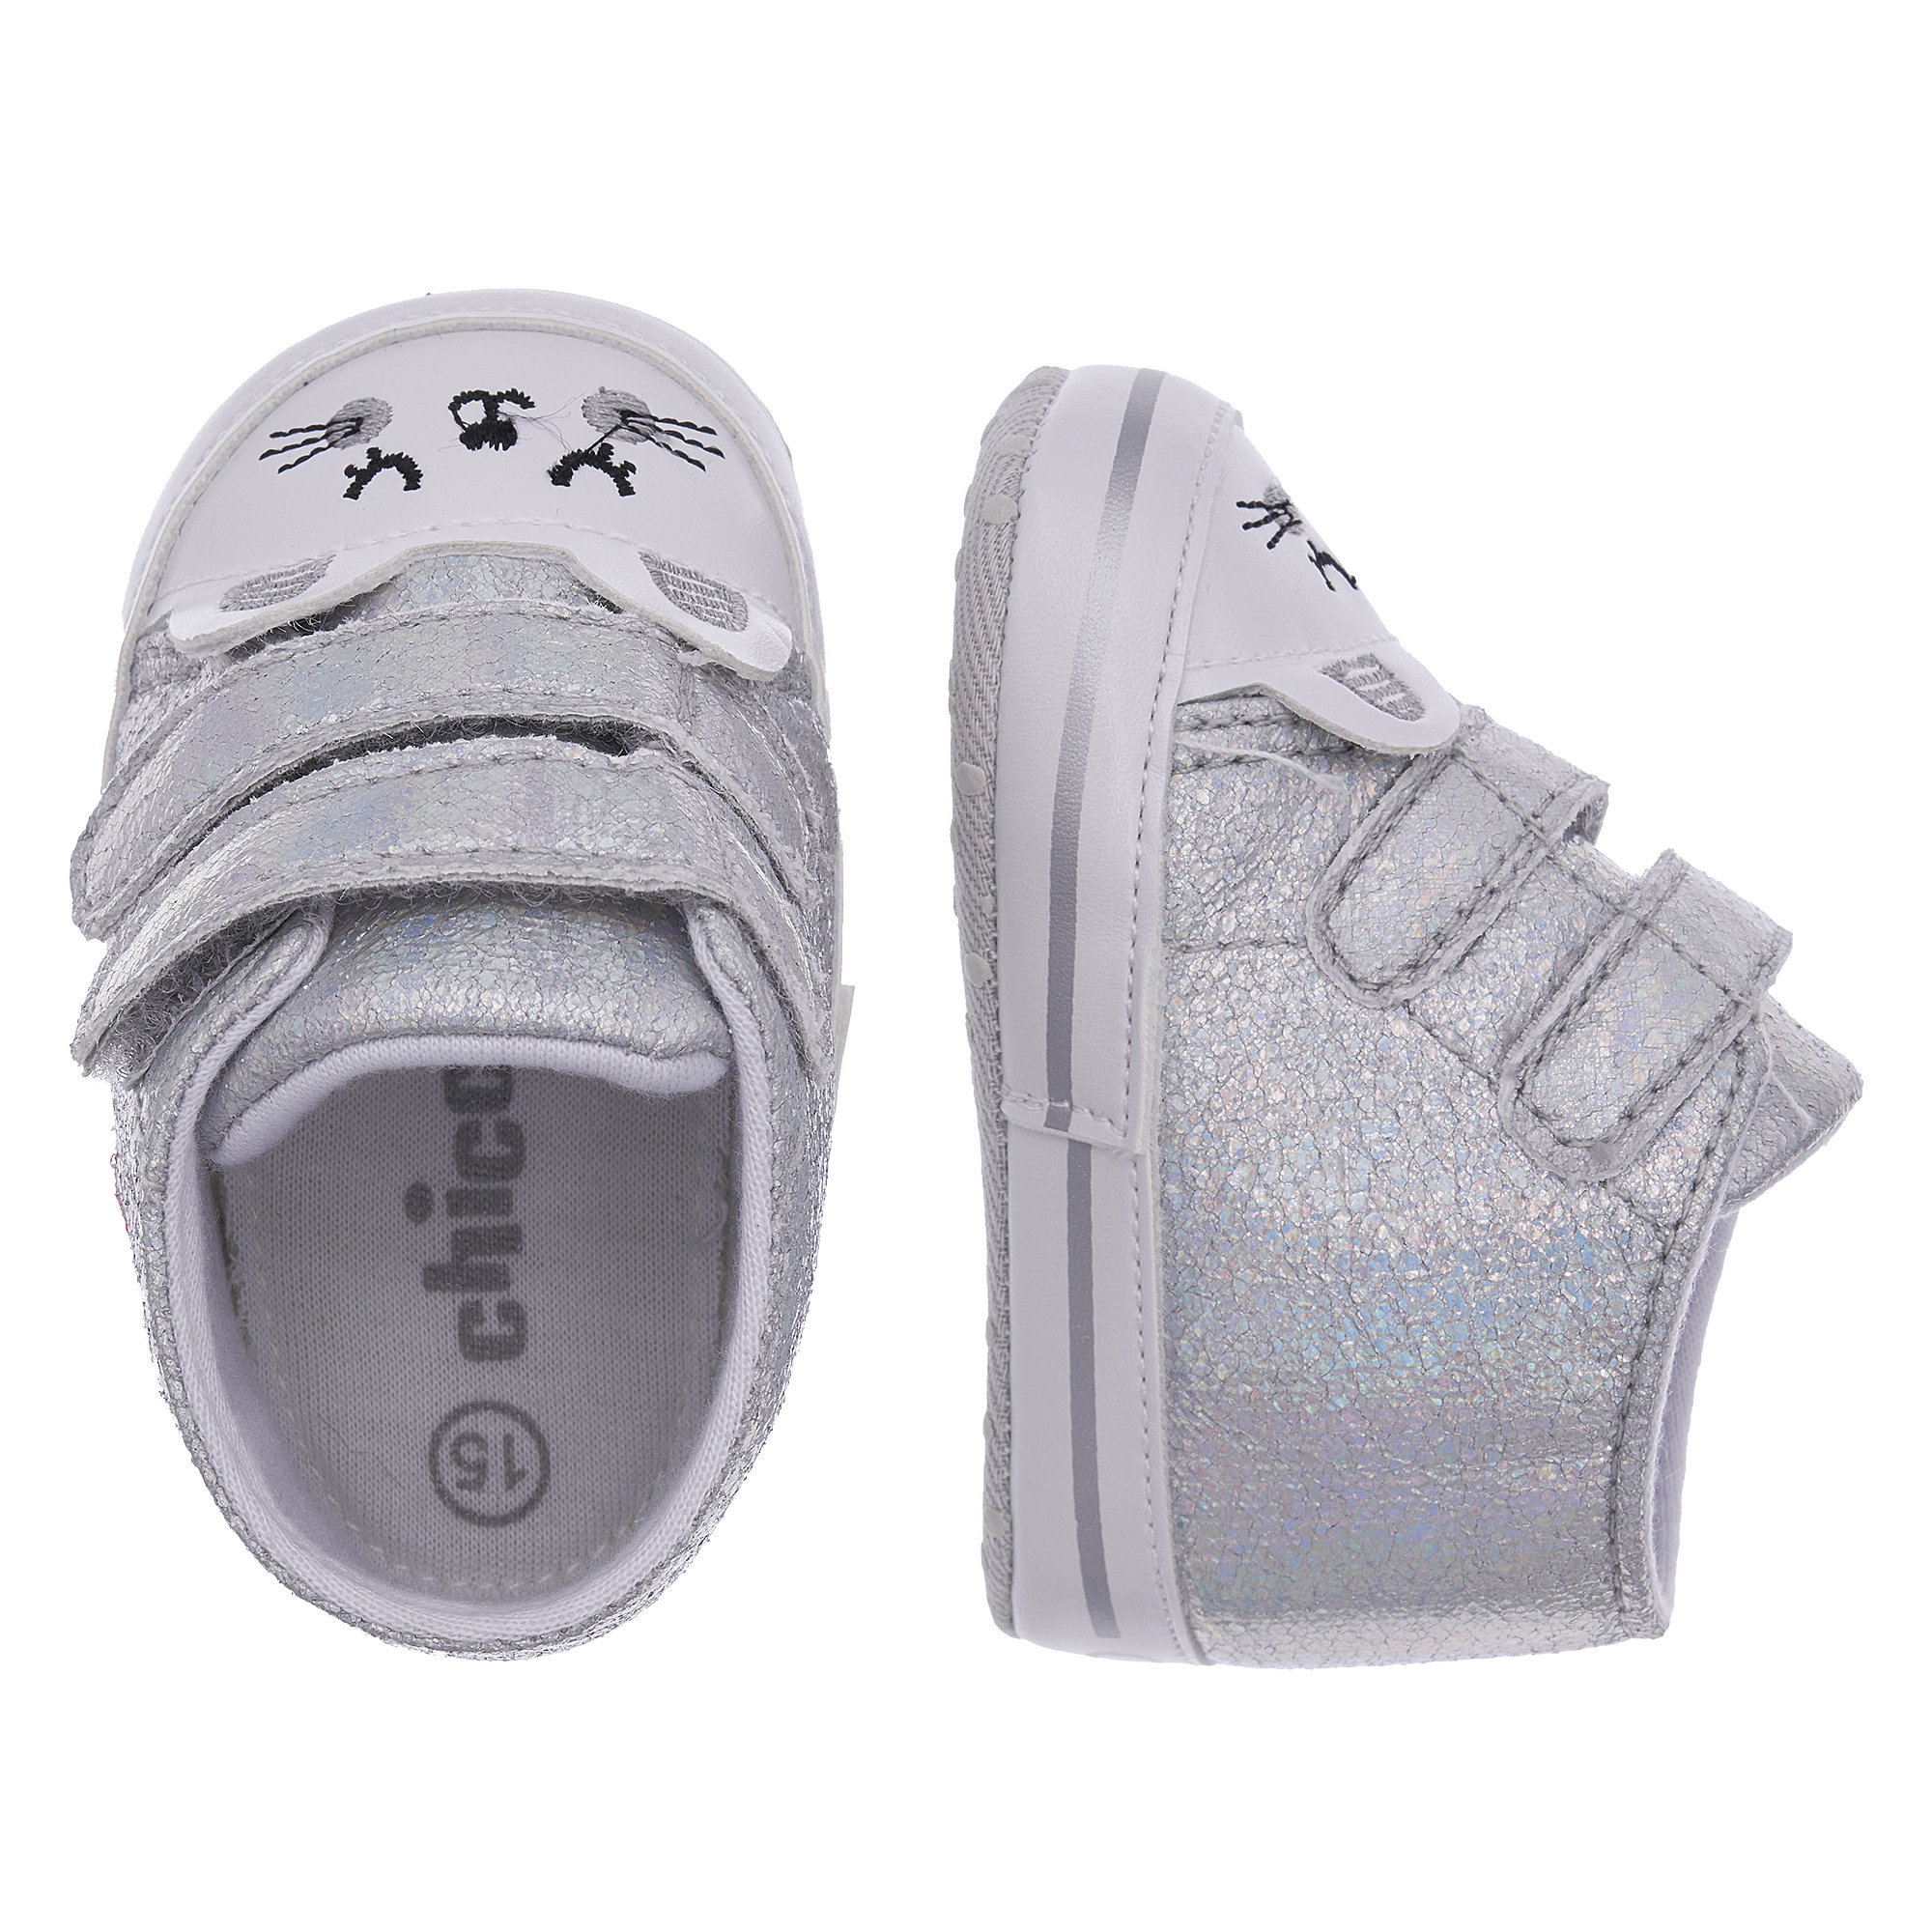 Chicco sneaker nolly - Chicco